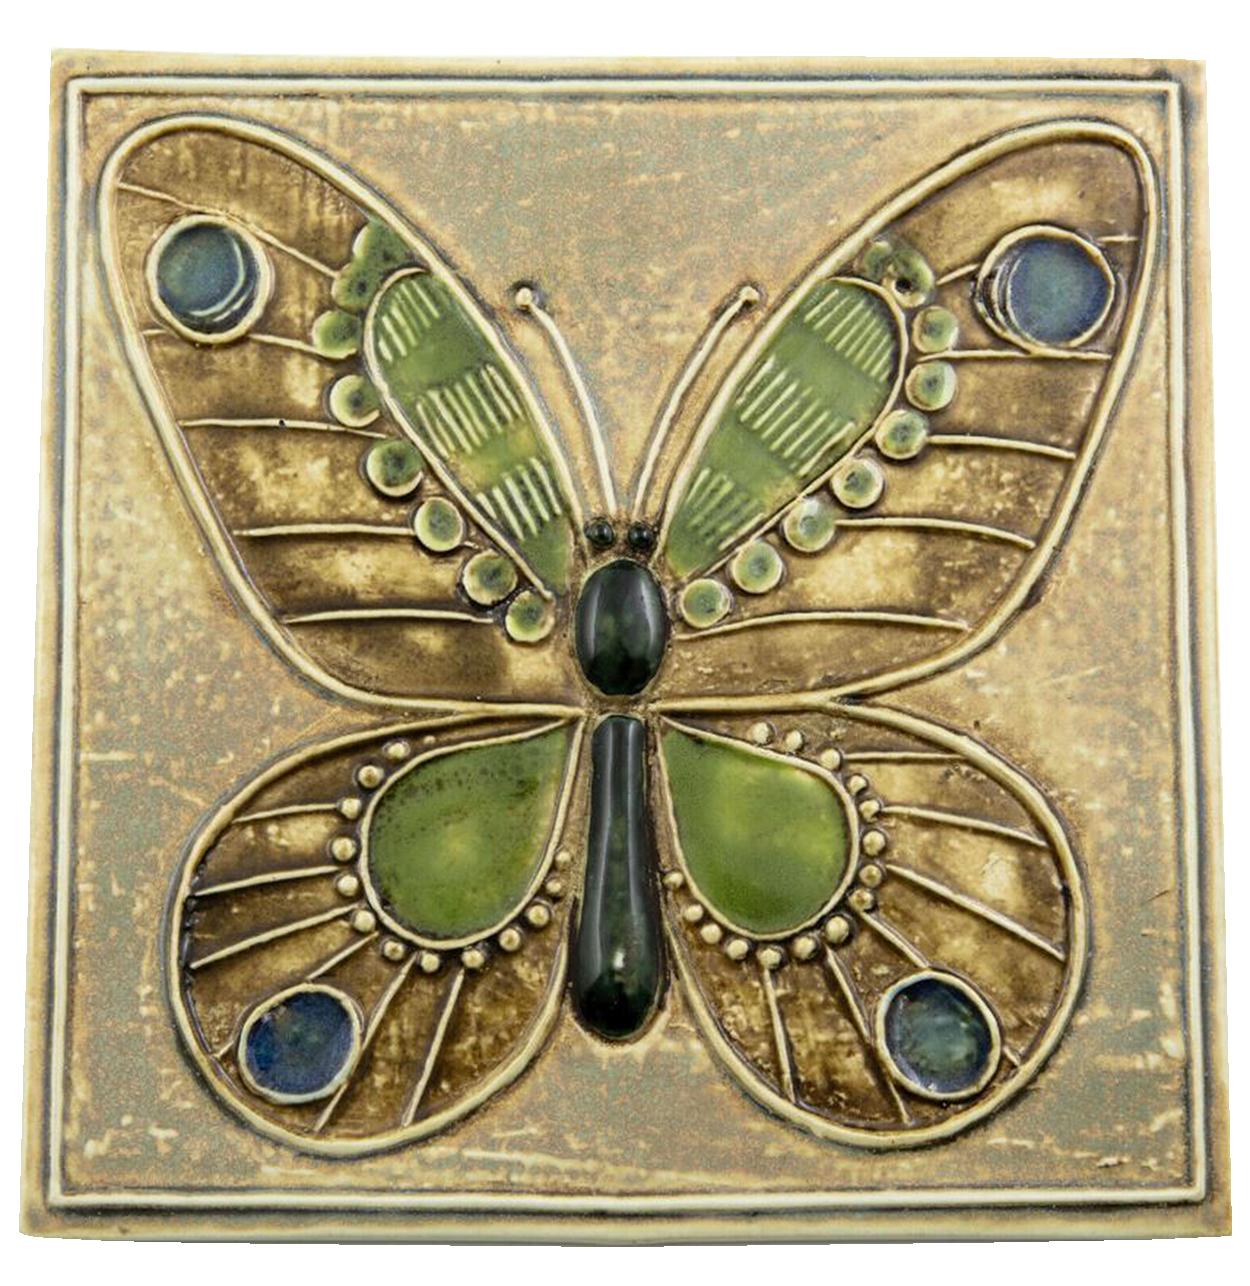 A most unique and unusual piece of wall art by the well known Swedish Lisa Larson for Gustavsberg, 1970s. There are 3 individually tiles plaques. Each pattered tile is a work of art in itself. Each tile is individually hand painted. Size each tile: